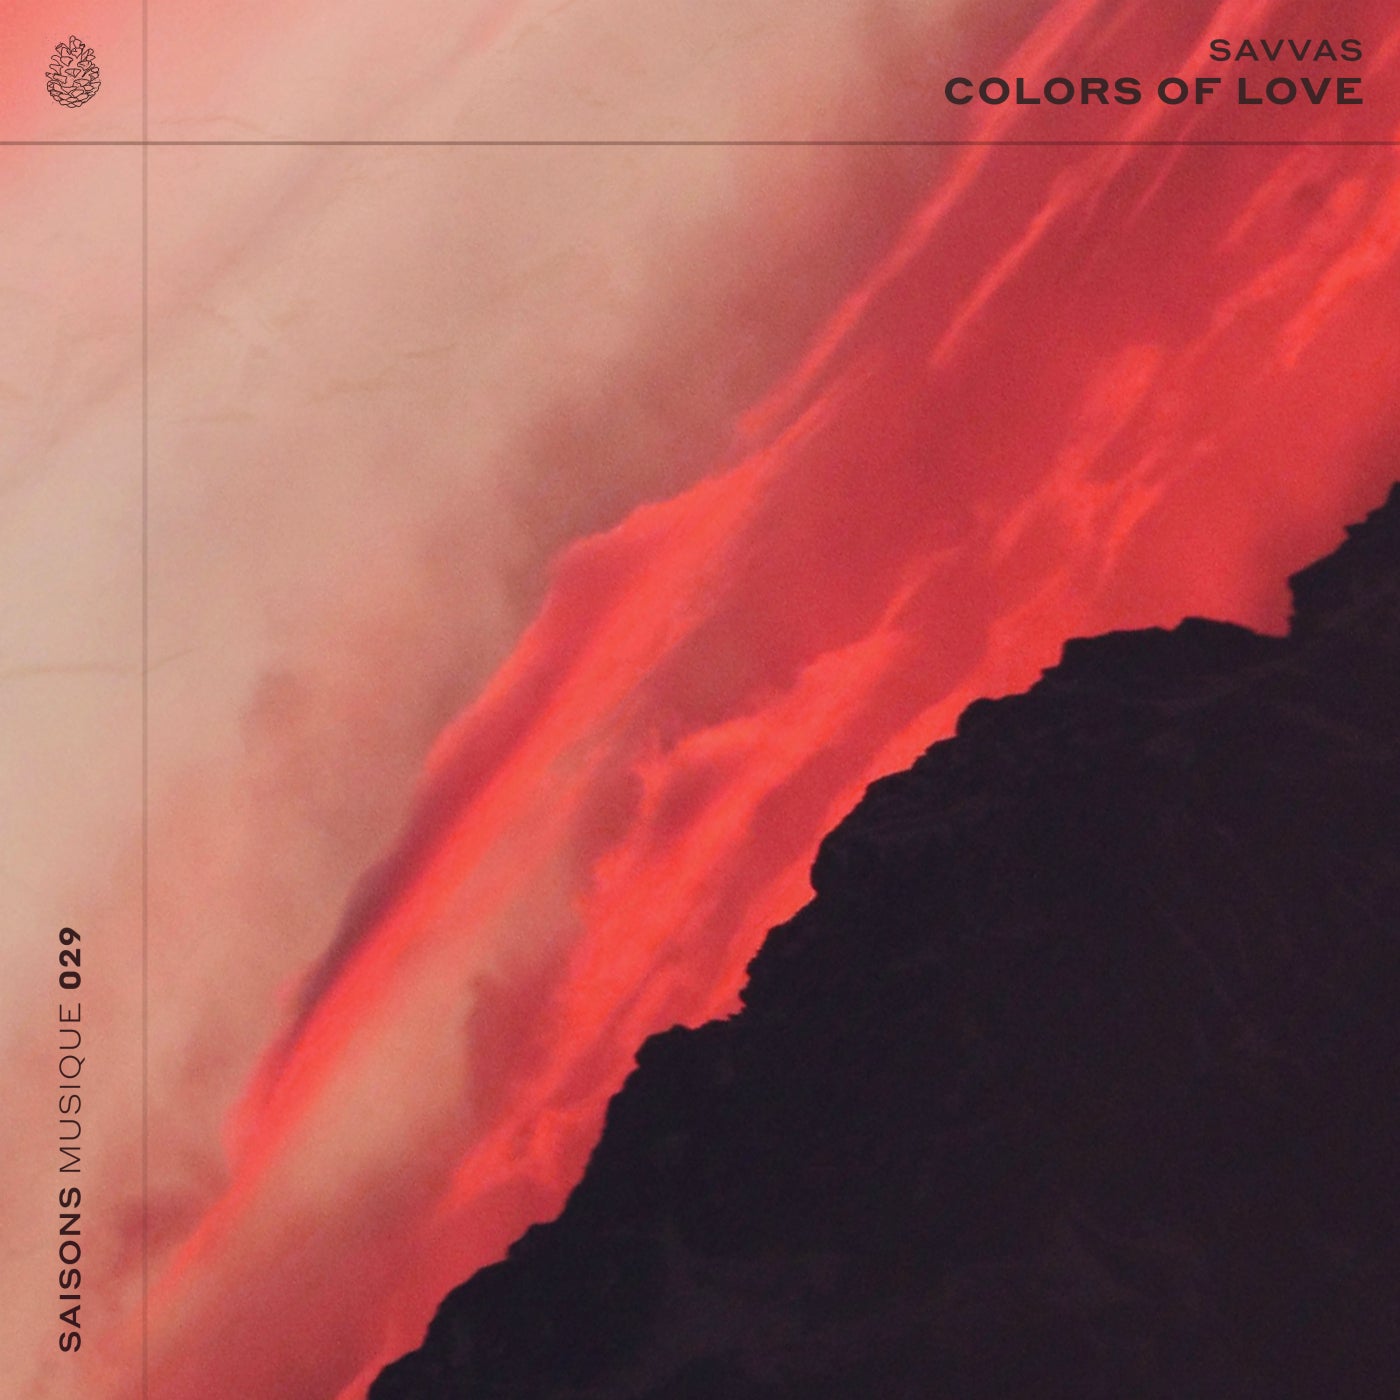 Cover - Savvas - Colors of Love (Ambient Mix)